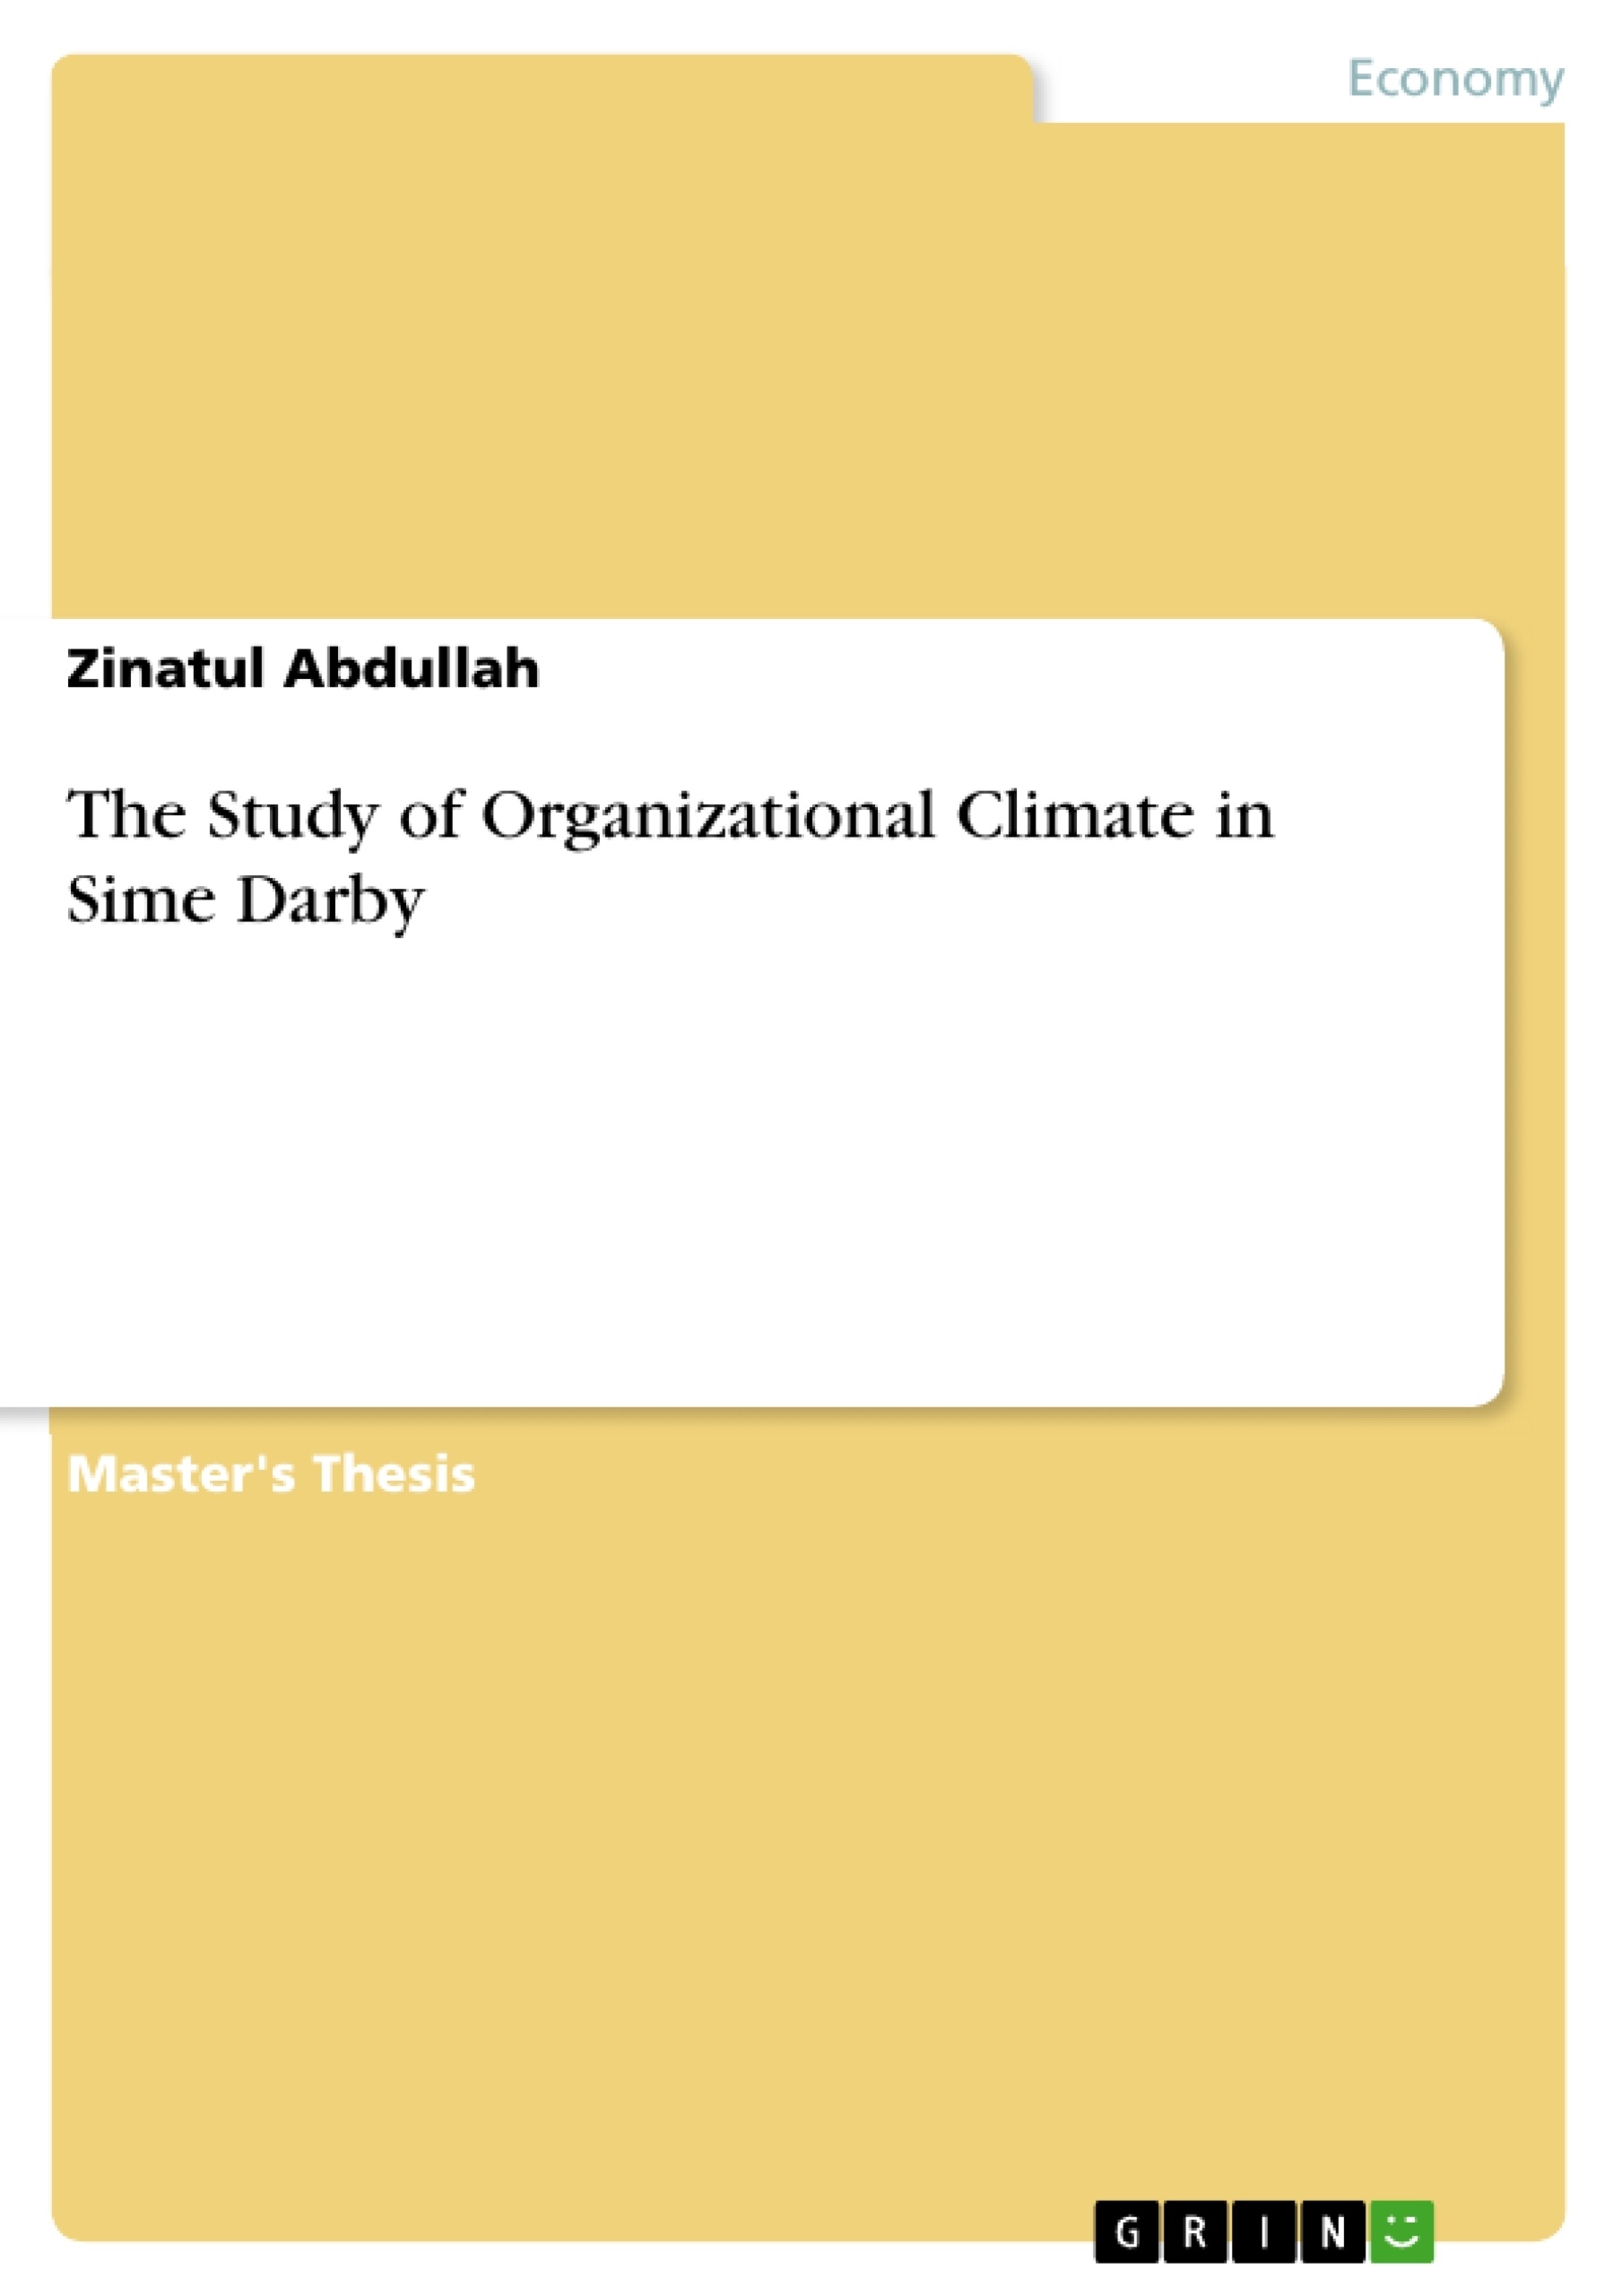 Title: The Study of Organizational Climate in Sime Darby